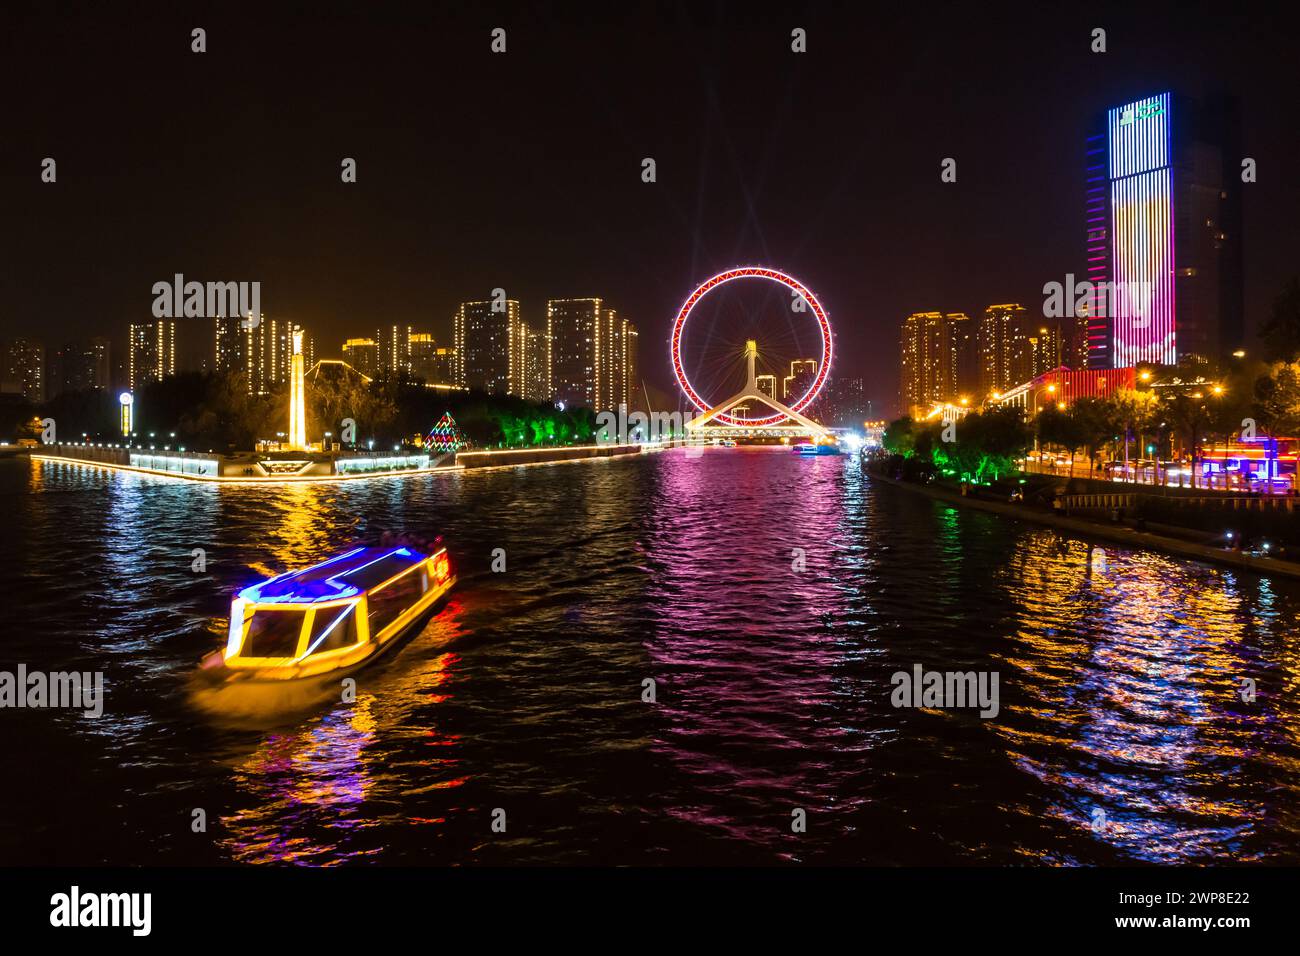 Night view over the illuminated tourist cruise boat and ferris wheel in Tianjin, China Stock Photo